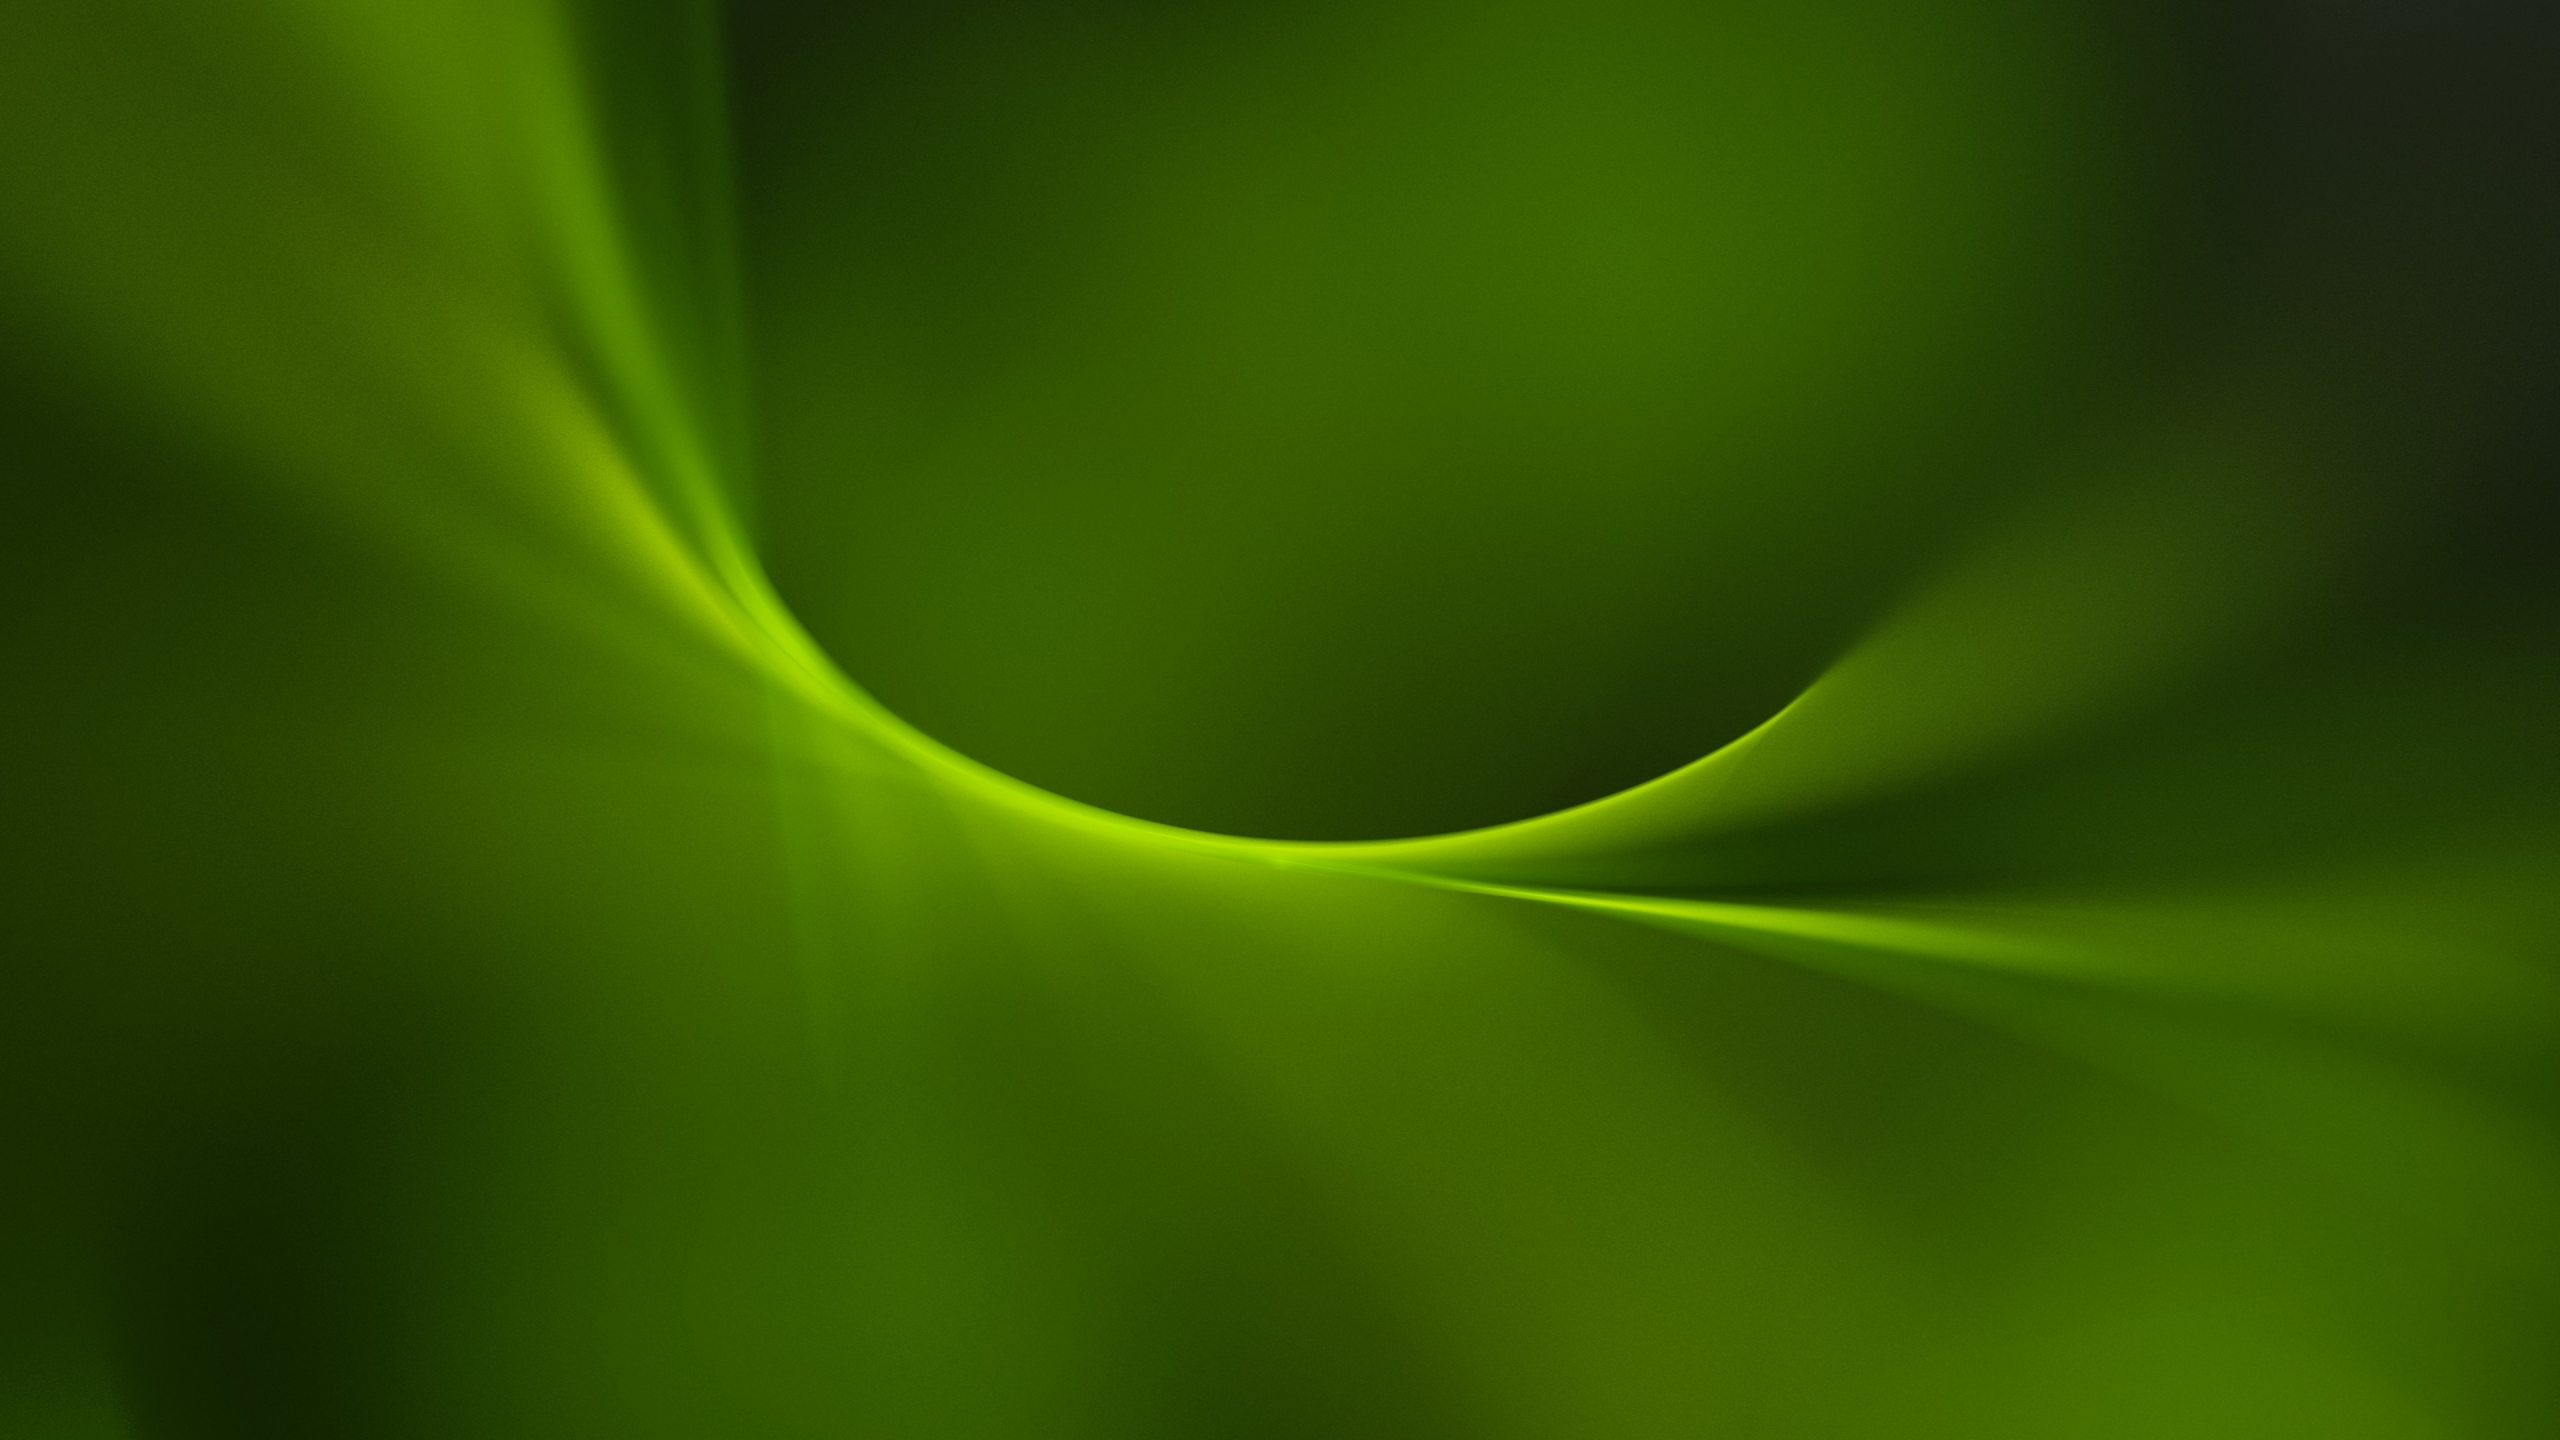 Download Wallpaper 2560x1440 Simple Green Curves Abstract Dual Wide 16 9 2560x1440 Hd Background 41